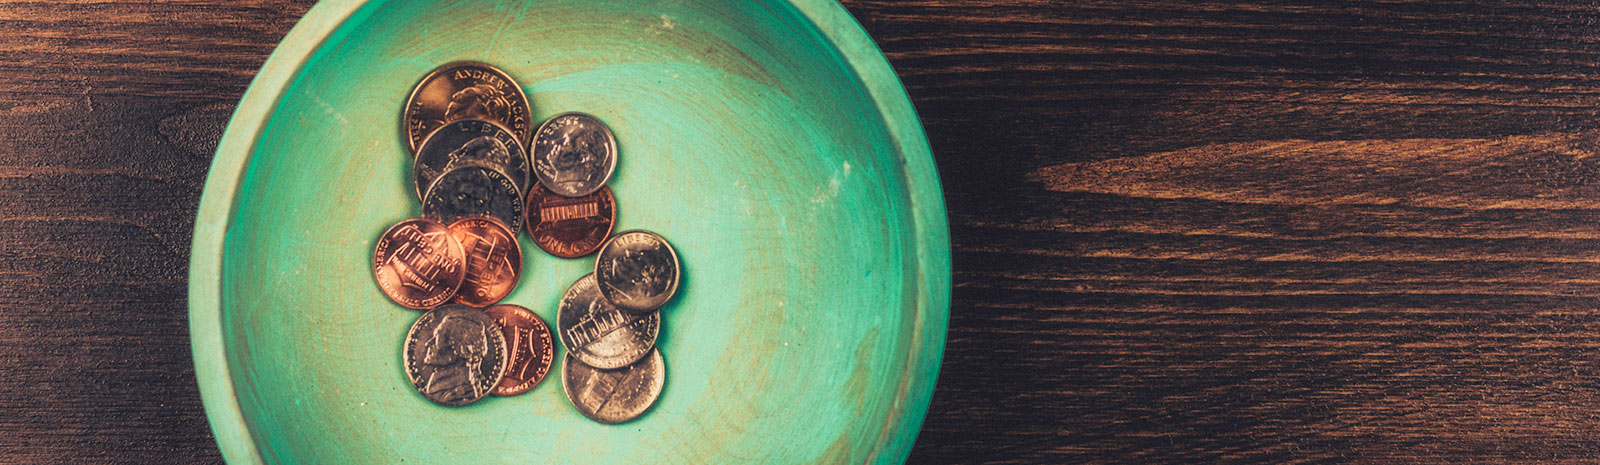 Coins in bowl on table.